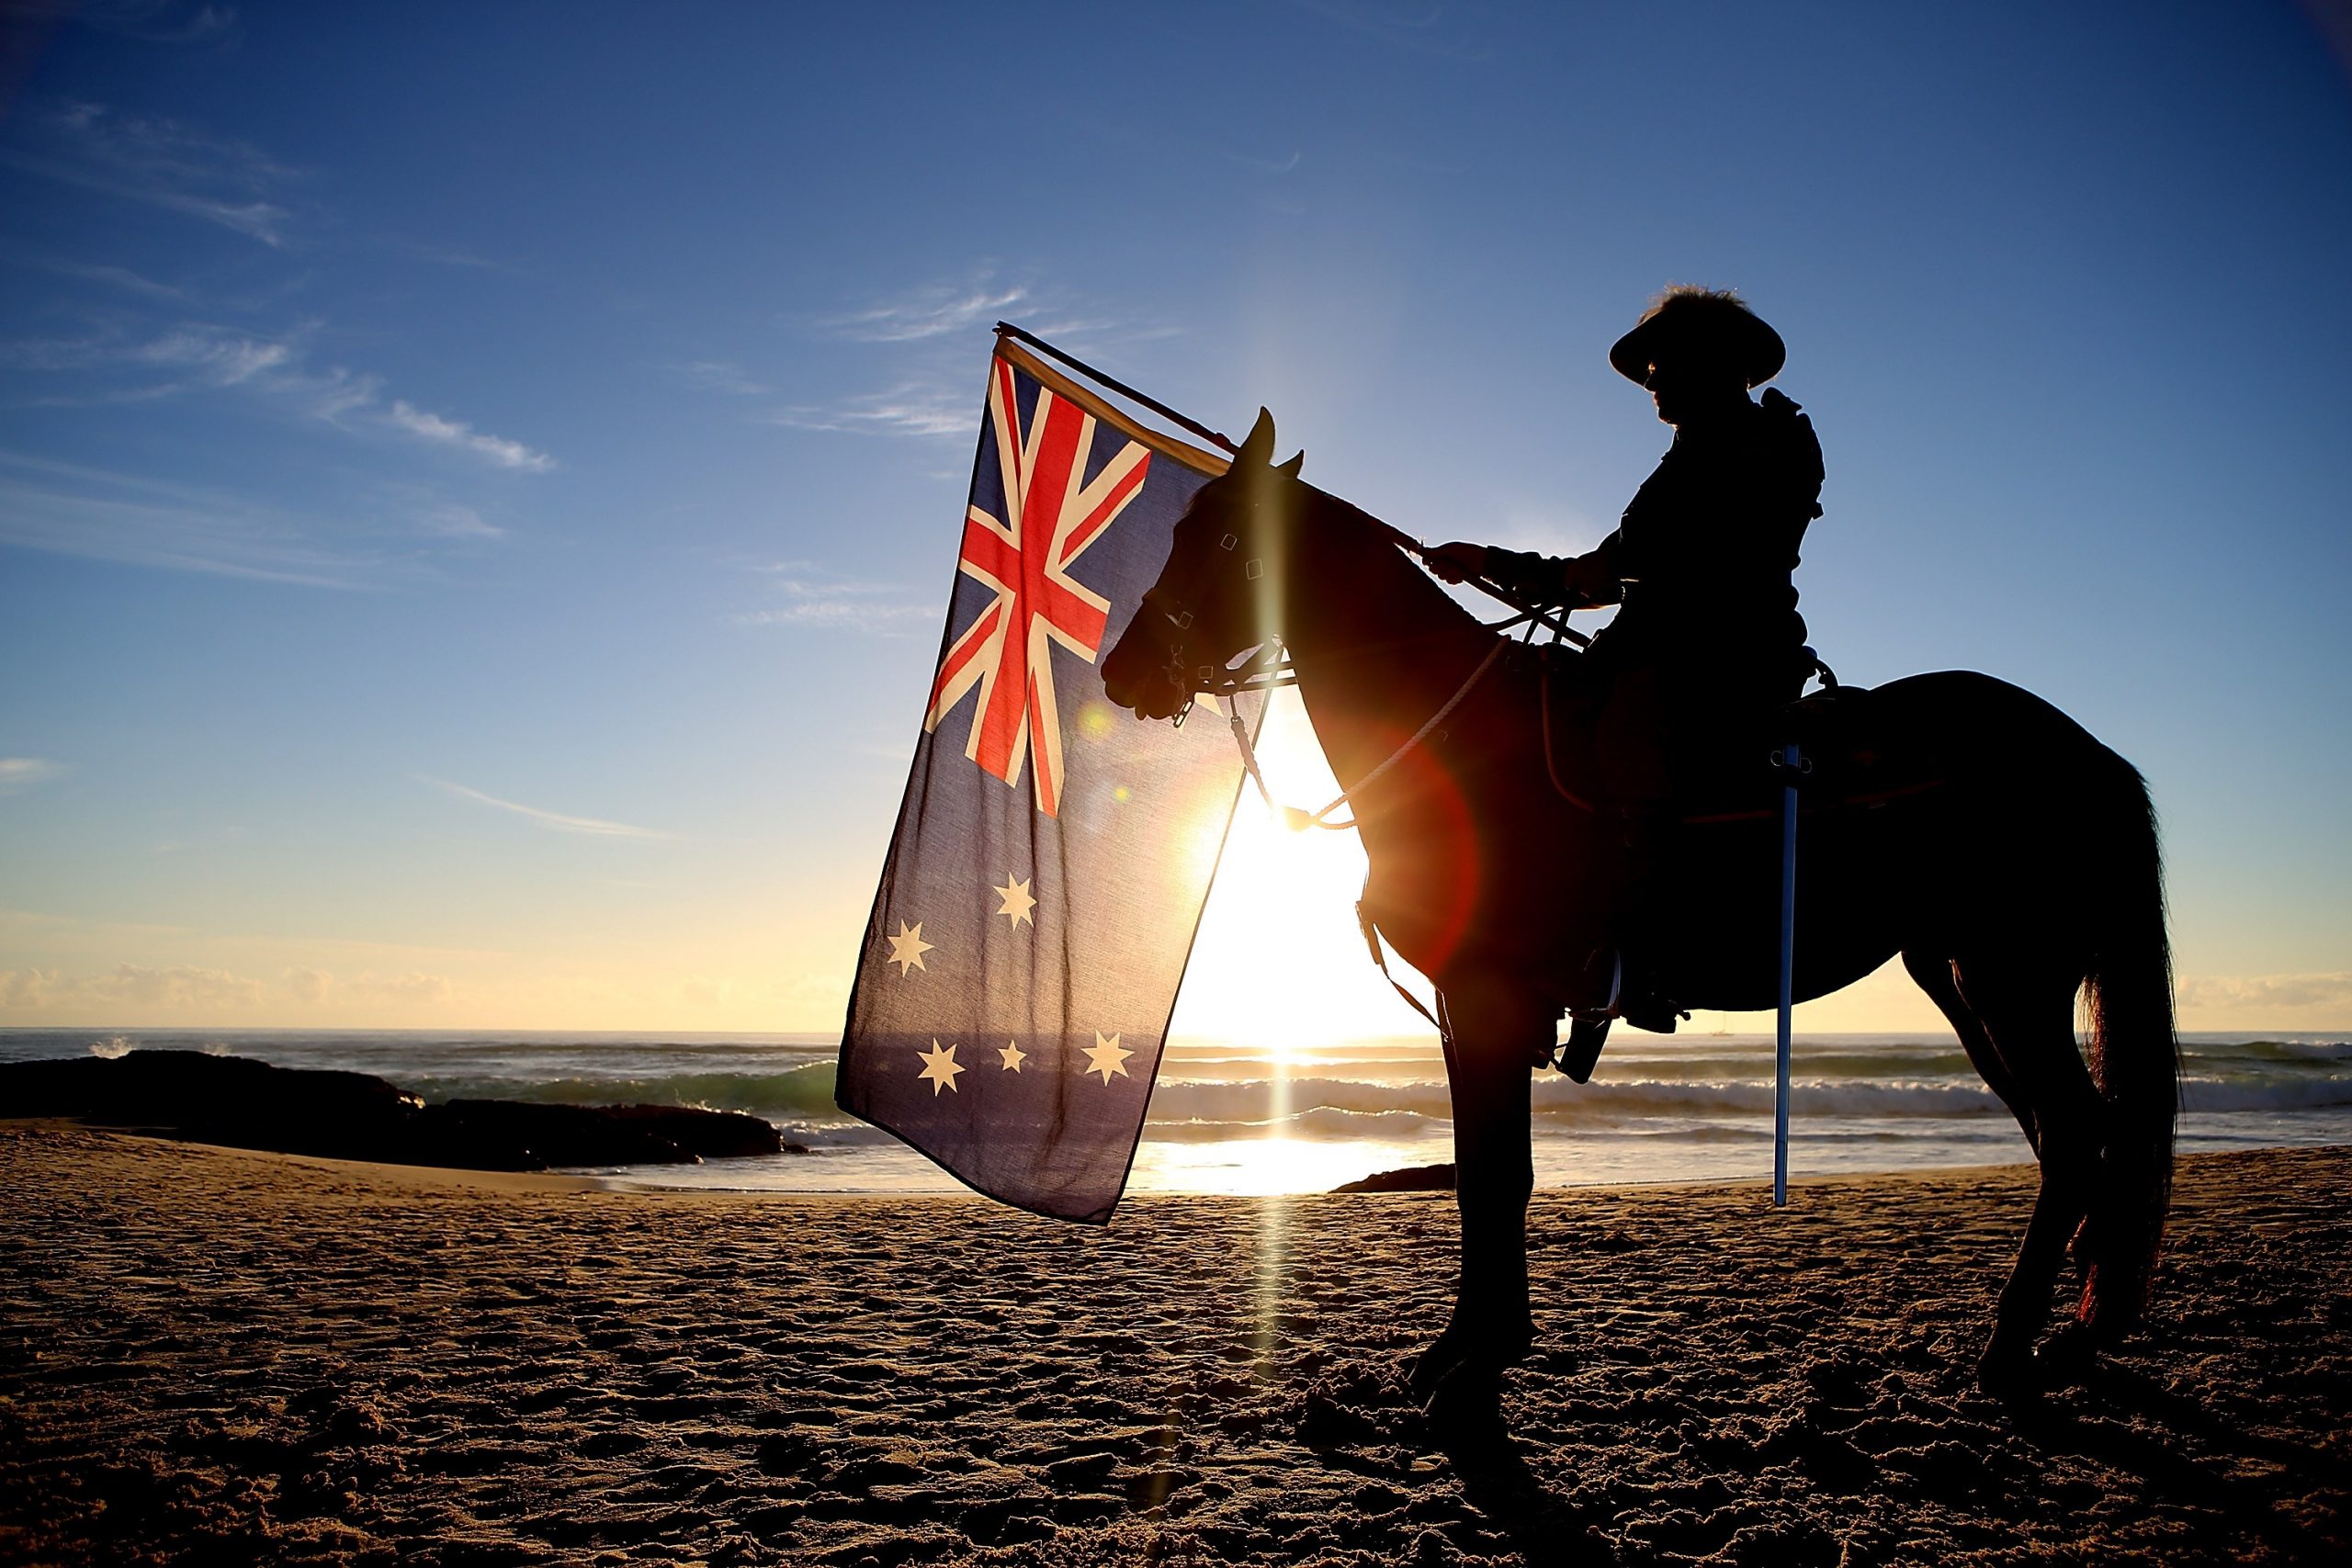 Lest we full list of ANZAC Day services on the Coast